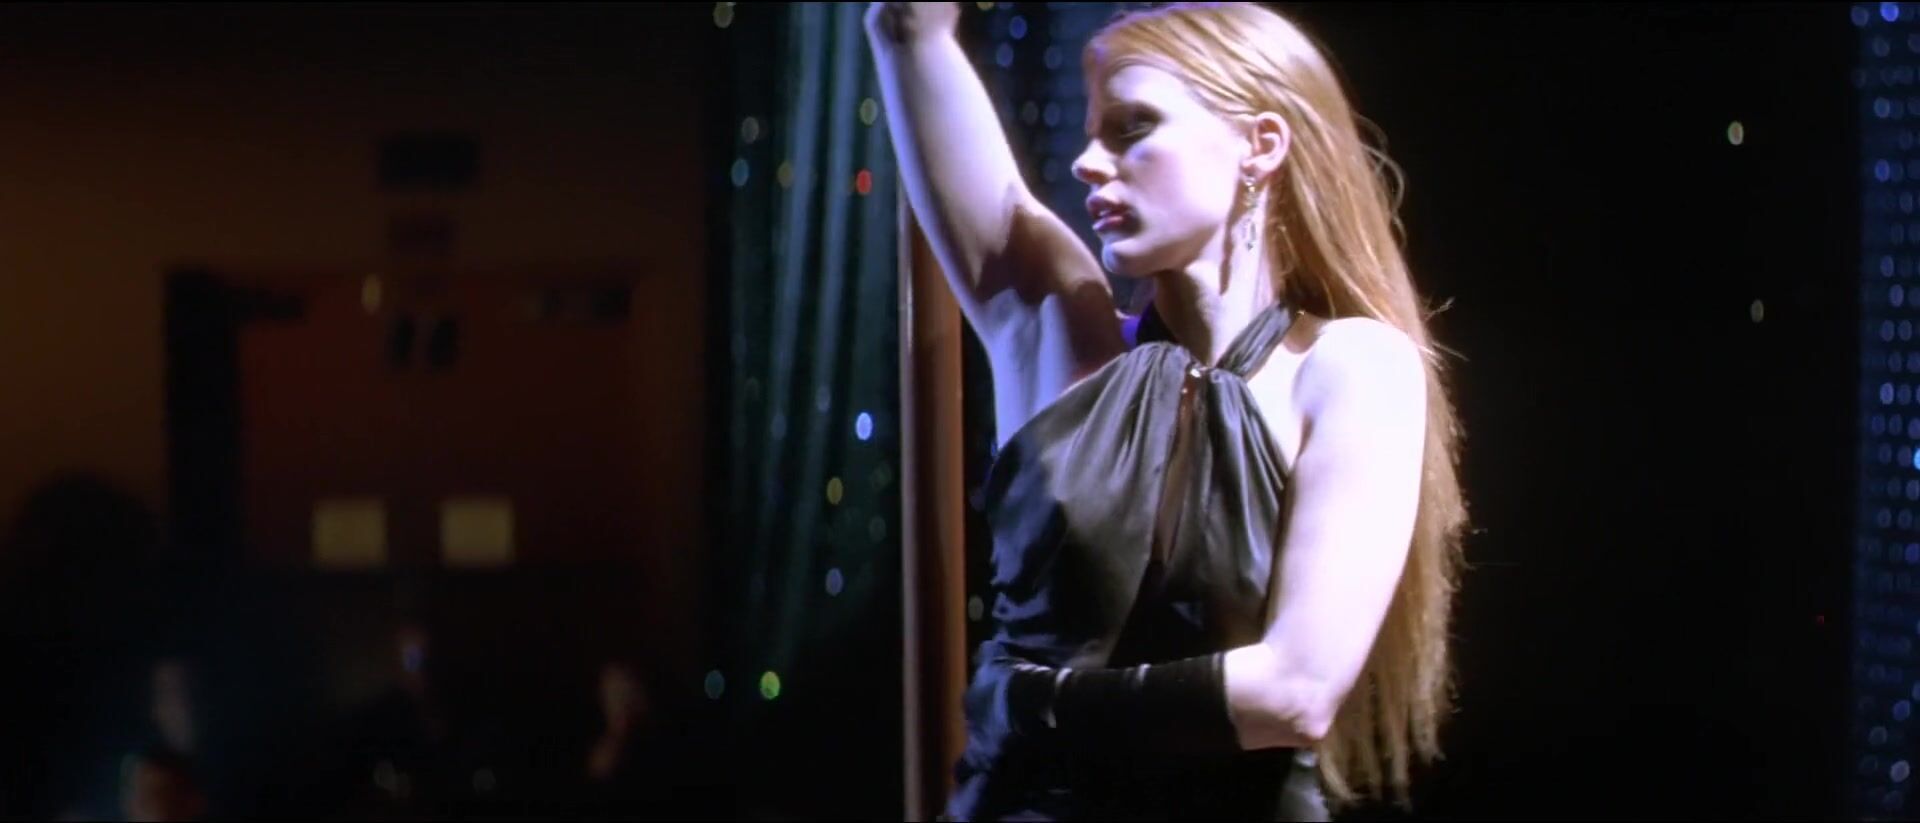 Gay Hunks Jessica Chastain moves around pole and pulls dress down showing boobies in Jolene (2008) Safada